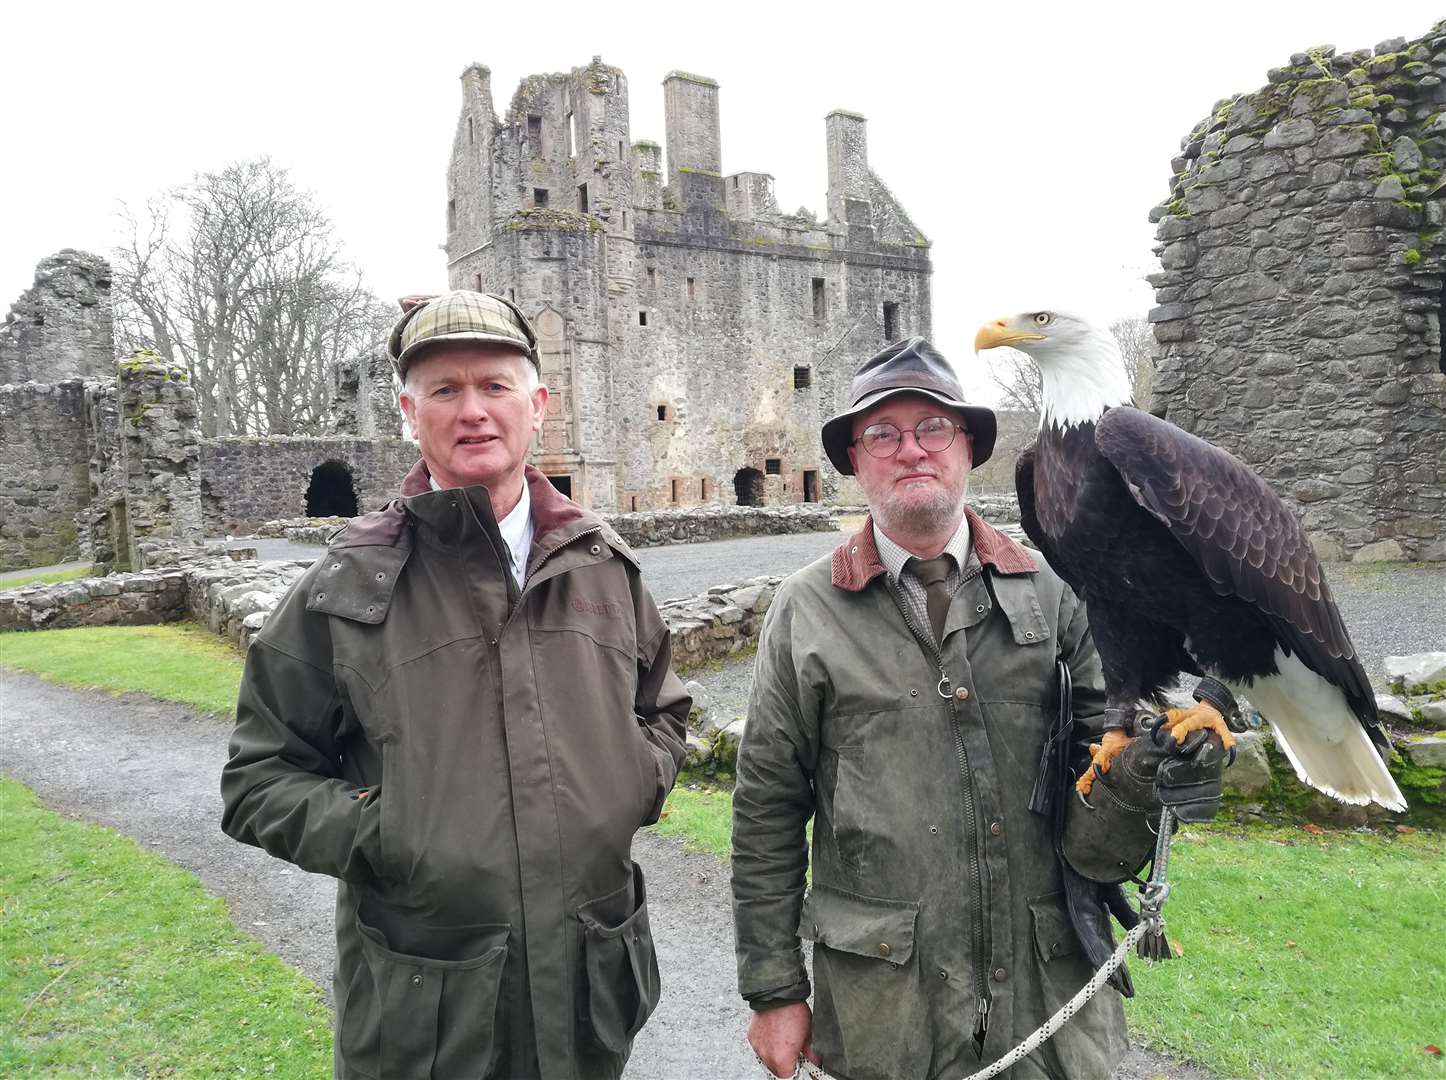 Kurt Kageler and John Barrie from the Huntly Falconry Centre.